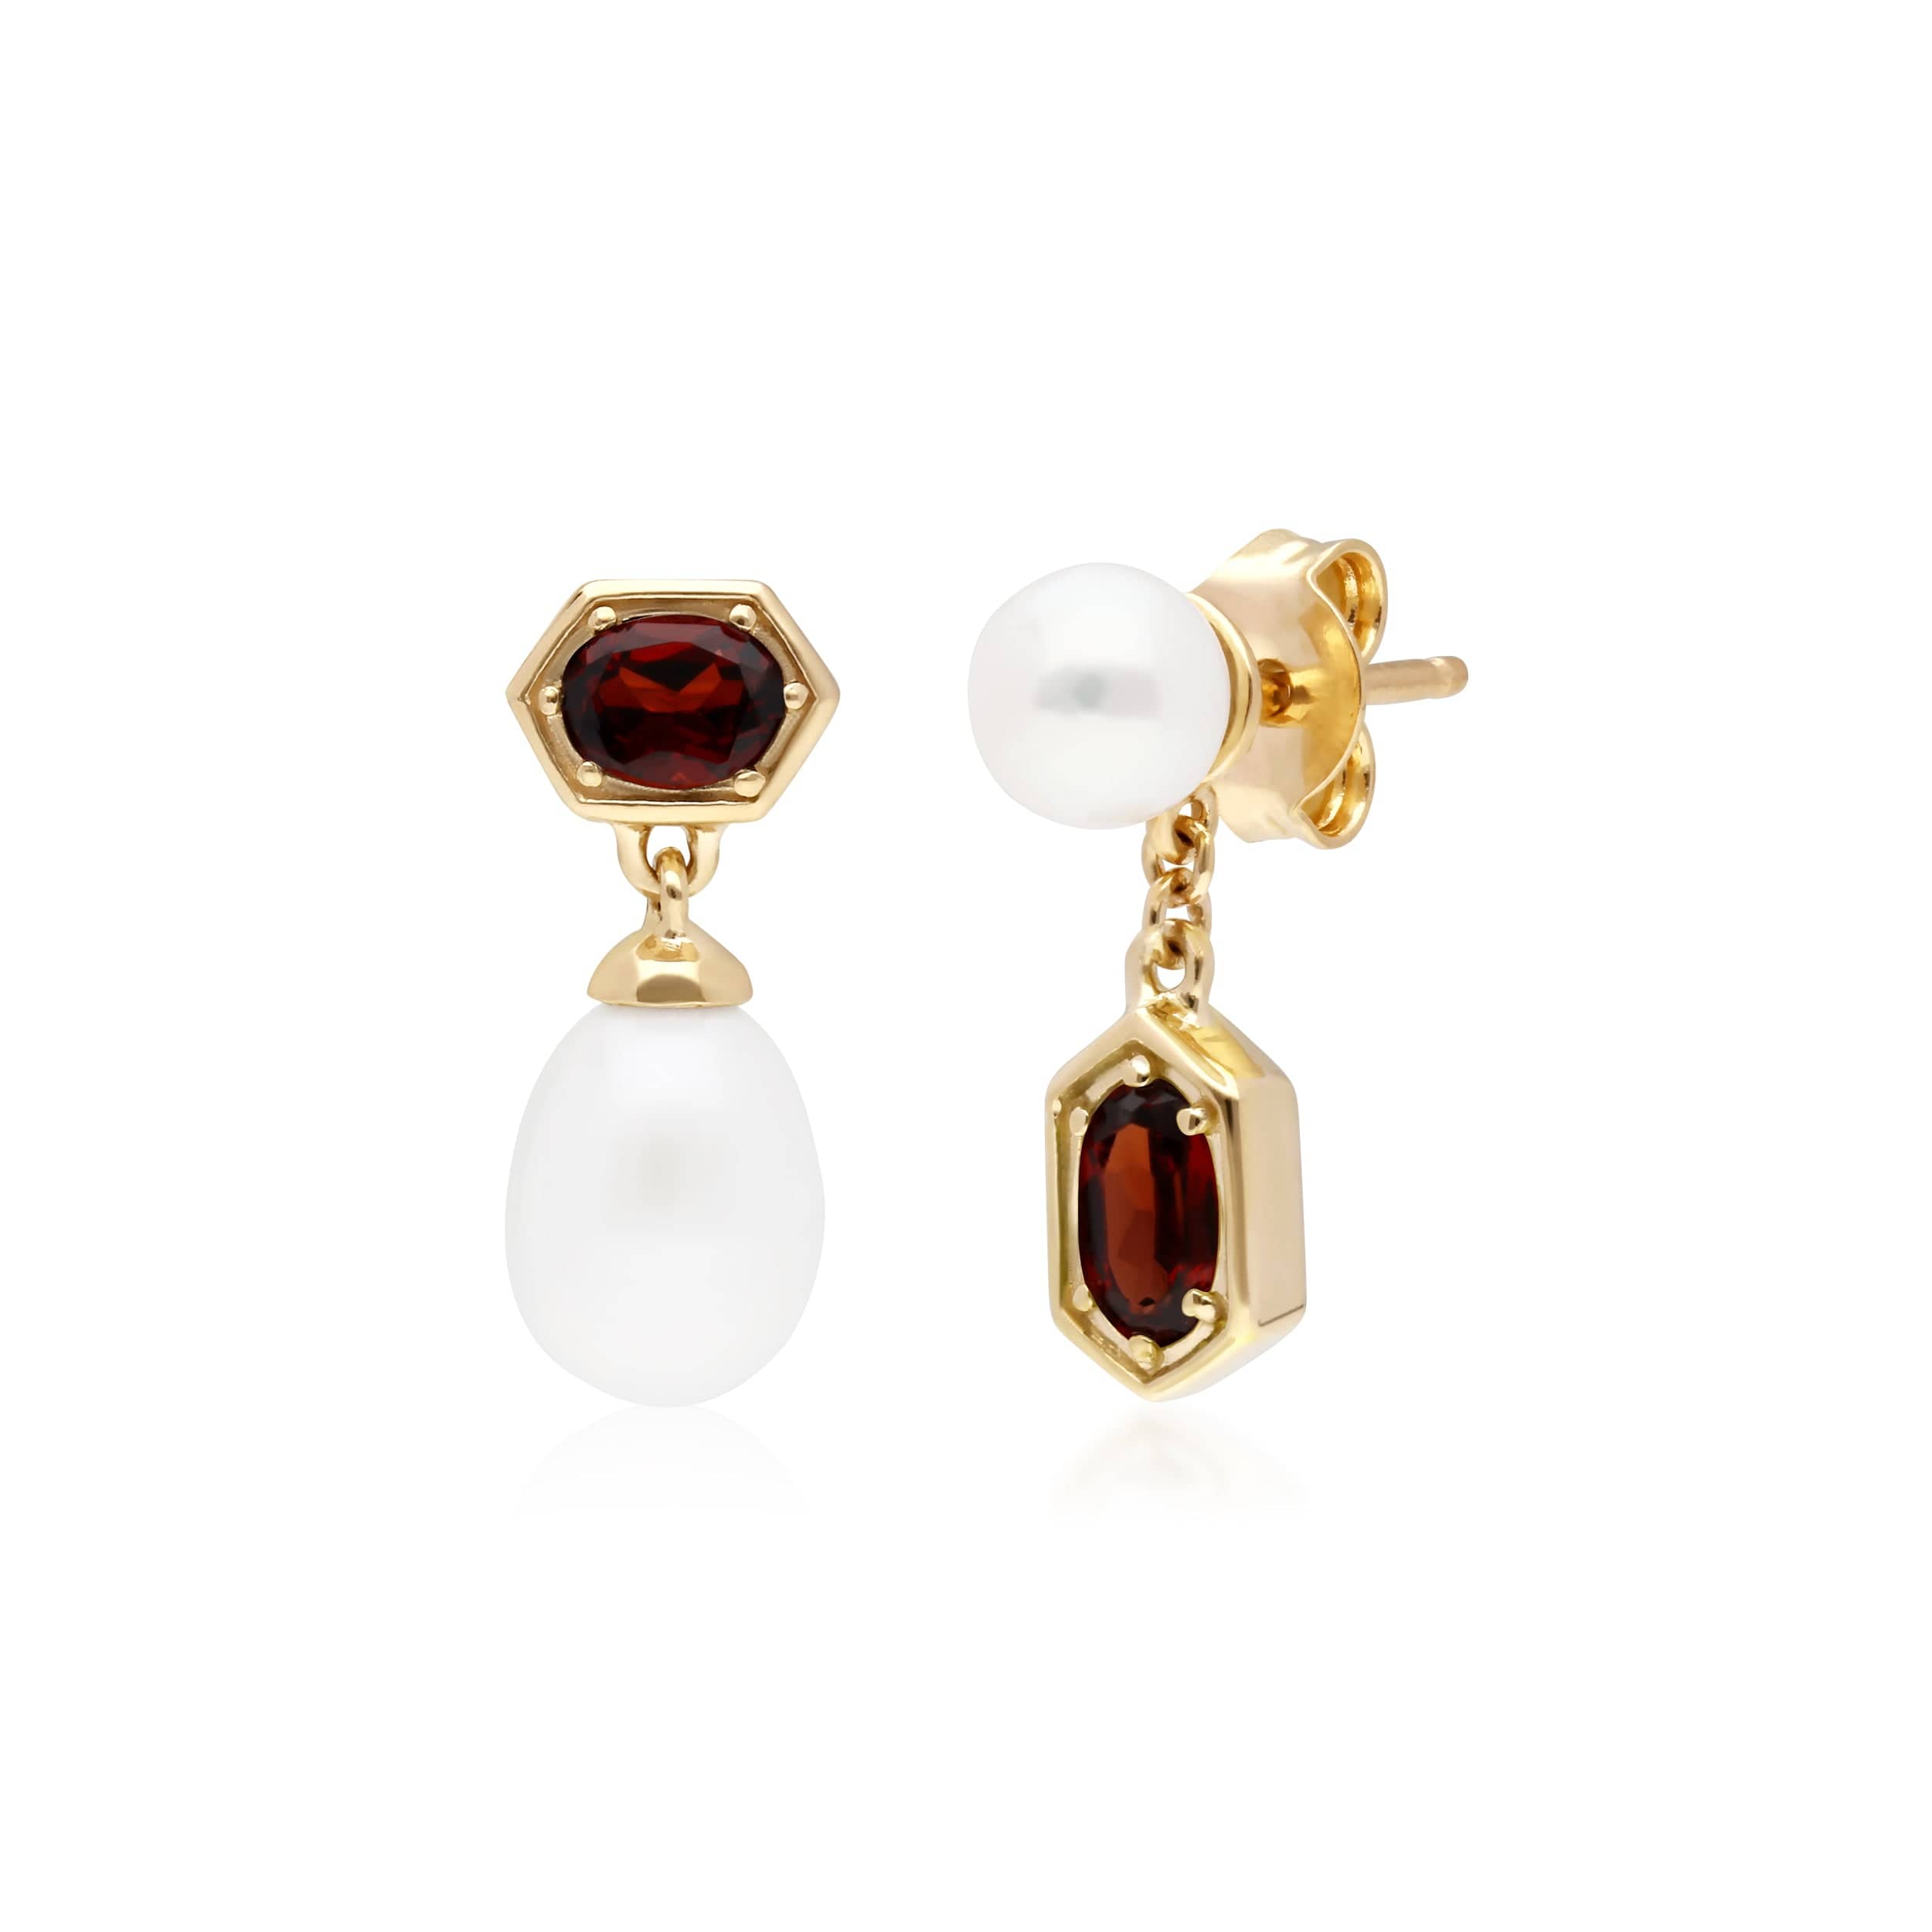 Modern Pearl & Garnet Mismatched Drop Earrings in Gold Plated Sterling Silver